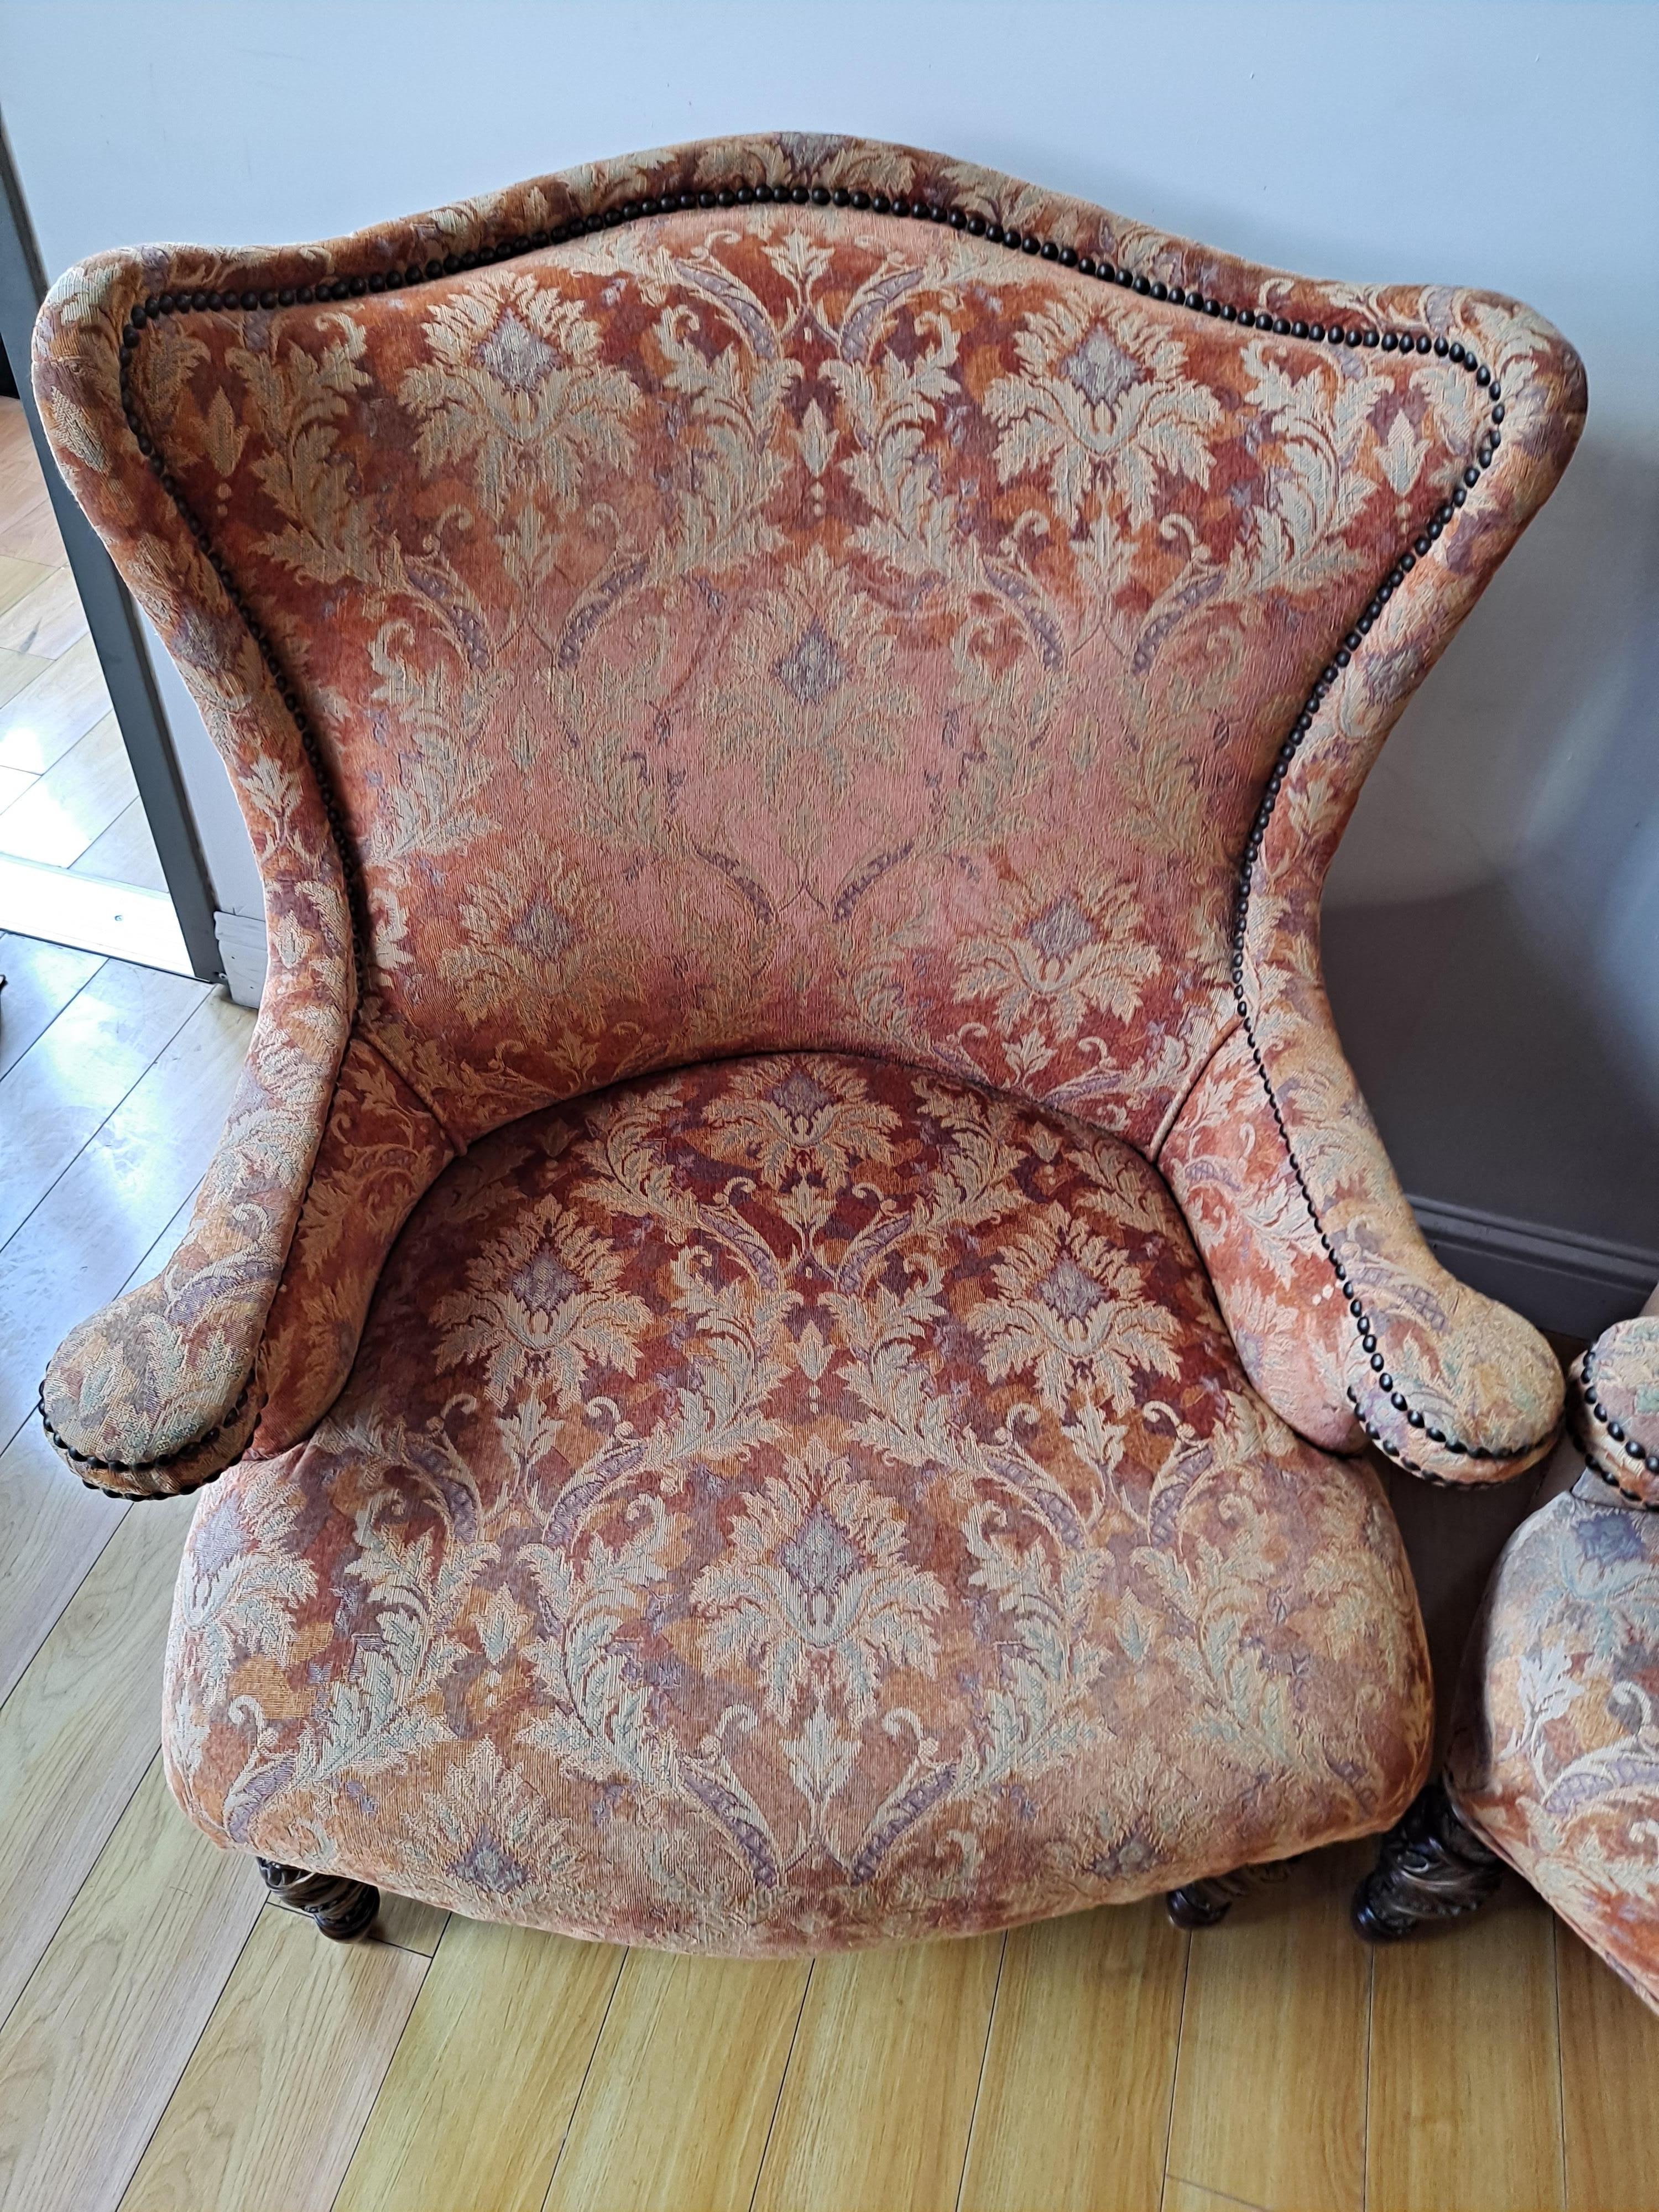 Pair of Michael Amini Wing-Back Armchairs w/Damask Pattern Upholstery

Turned wood legs and attractive nailhead trim 

33.5